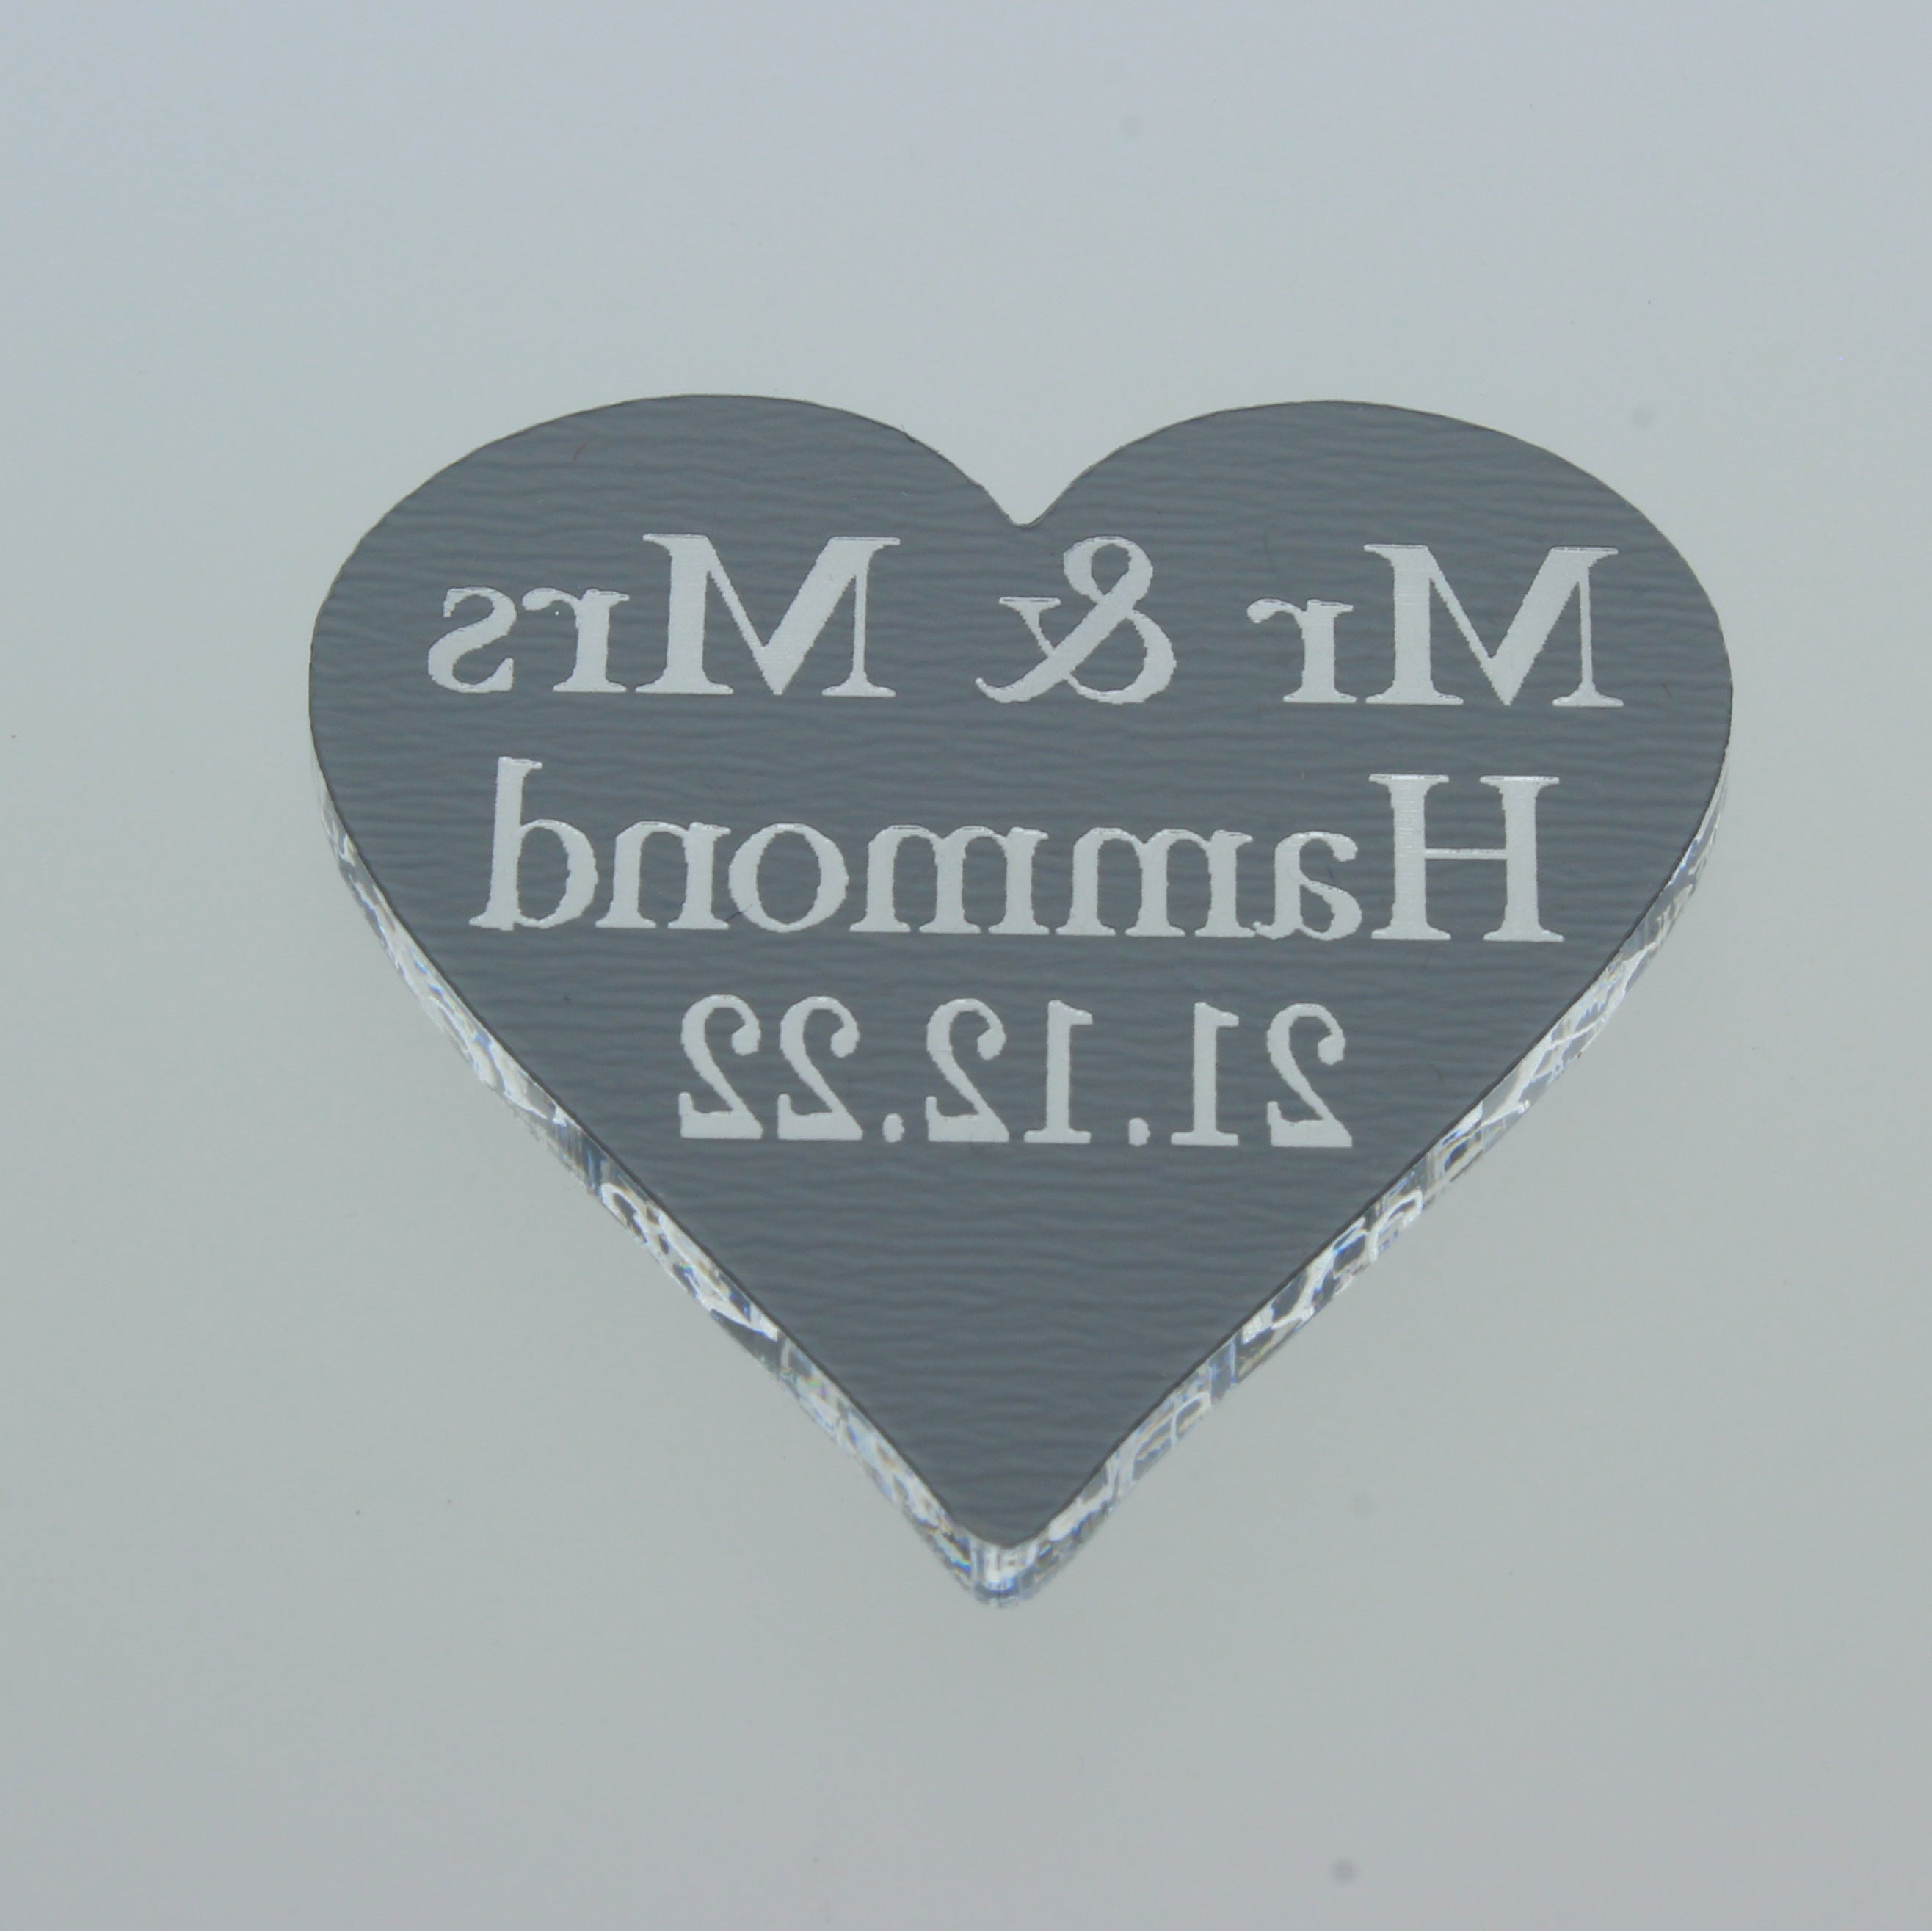 Personalised Wedding Favours - Red Mirror Acrylic Love Hearts